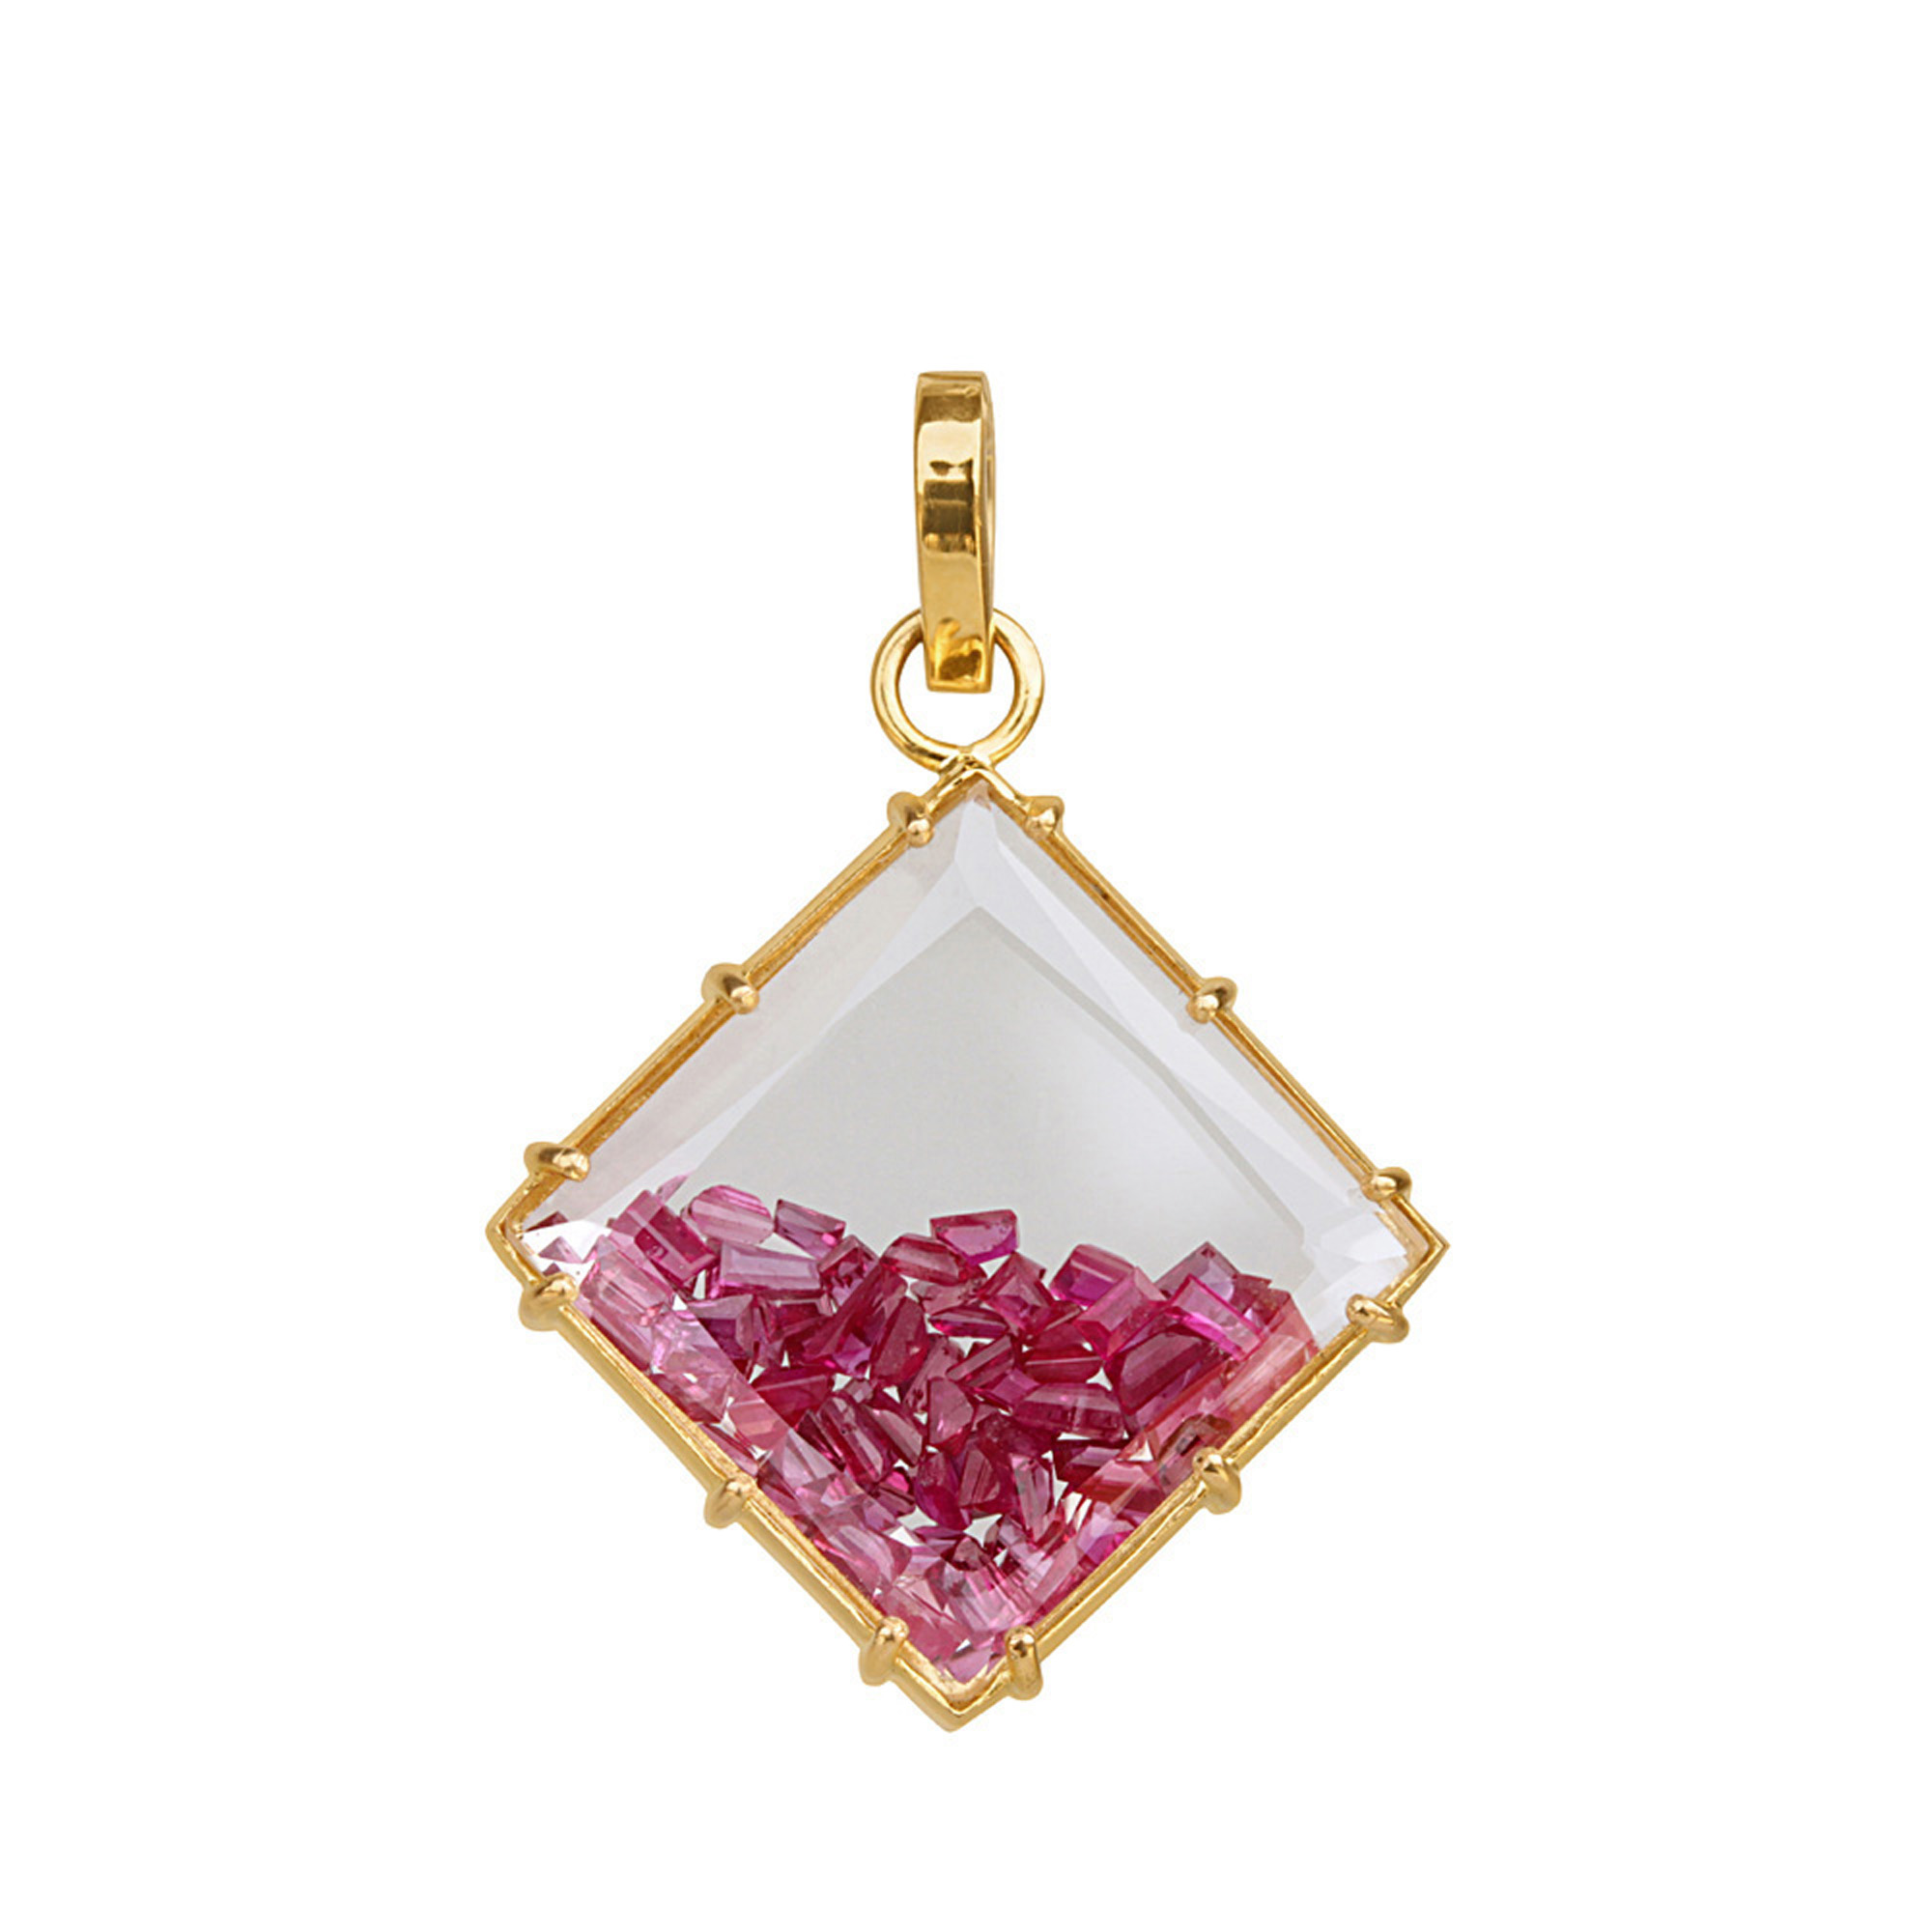 Loose ruby 18k solid gold crystal shaker pendant